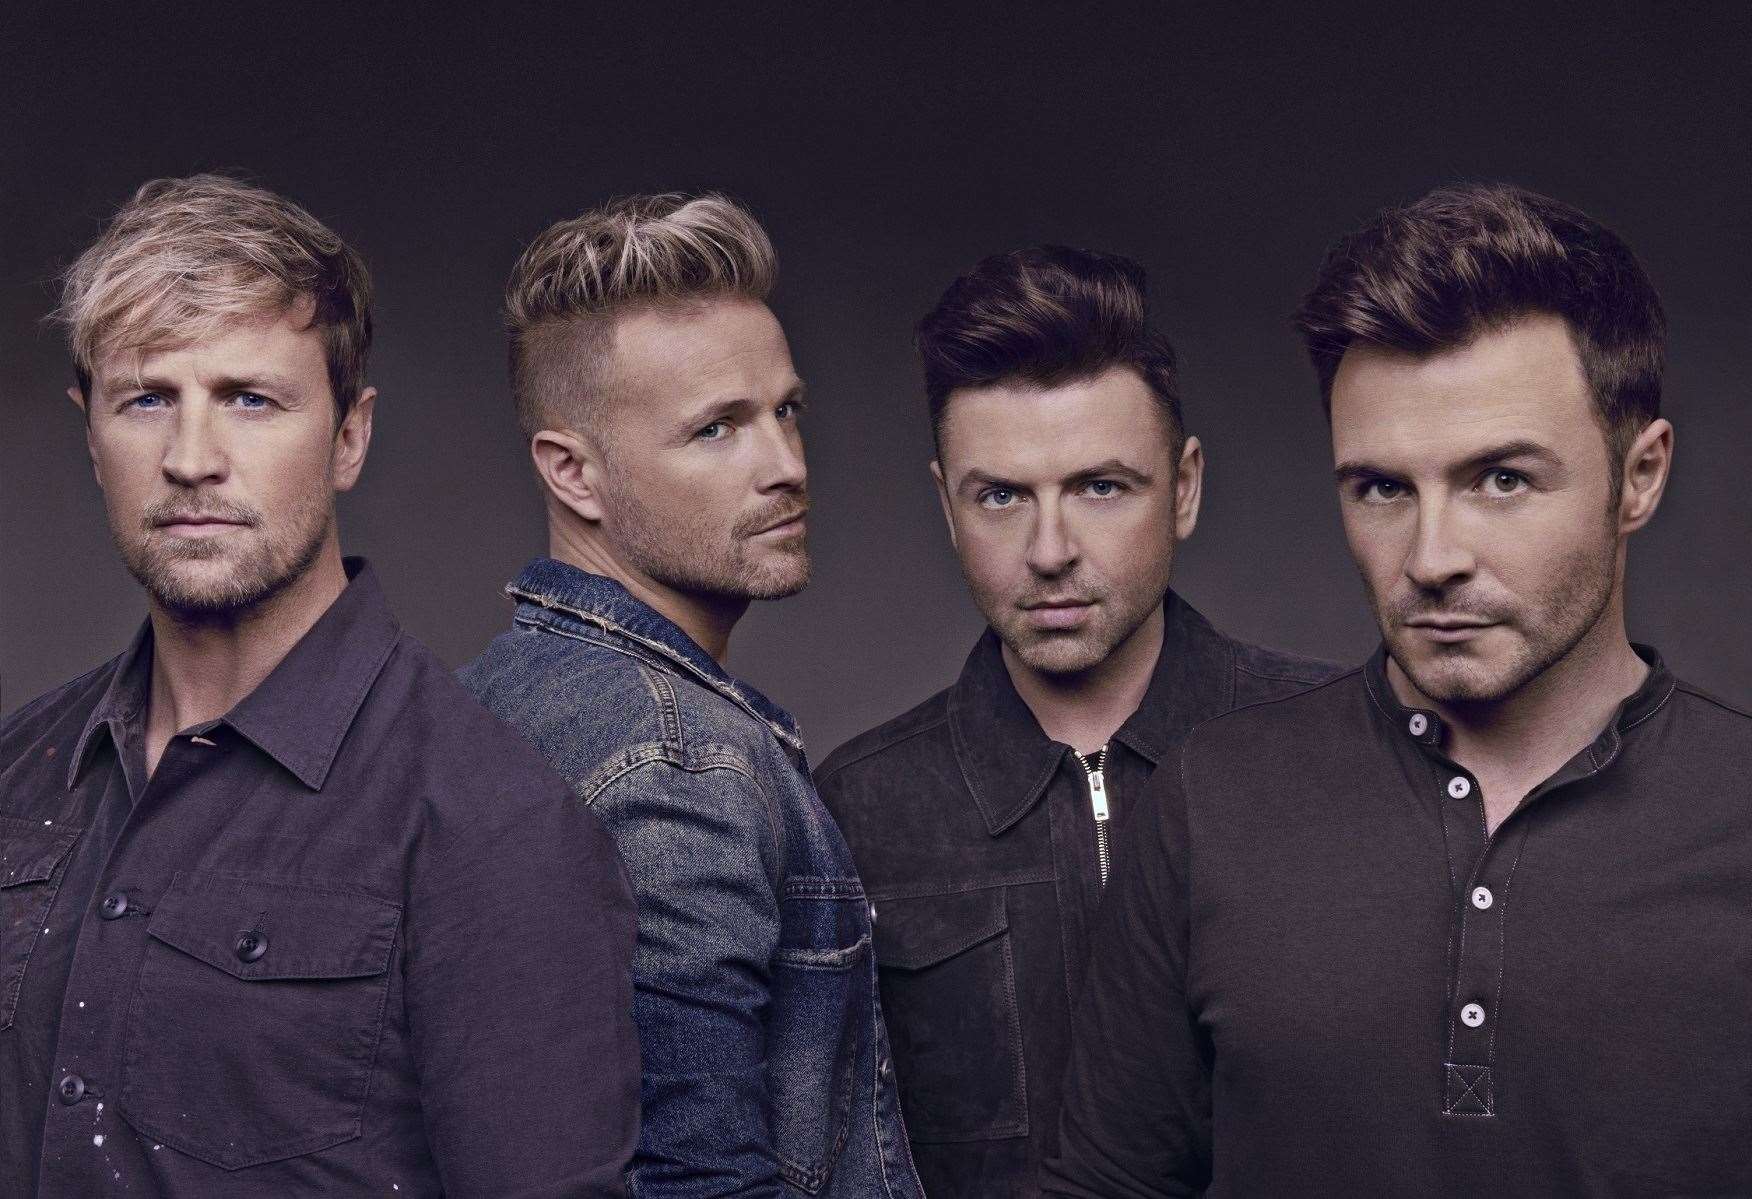 Westlife will be performing their biggest hits for fans this July